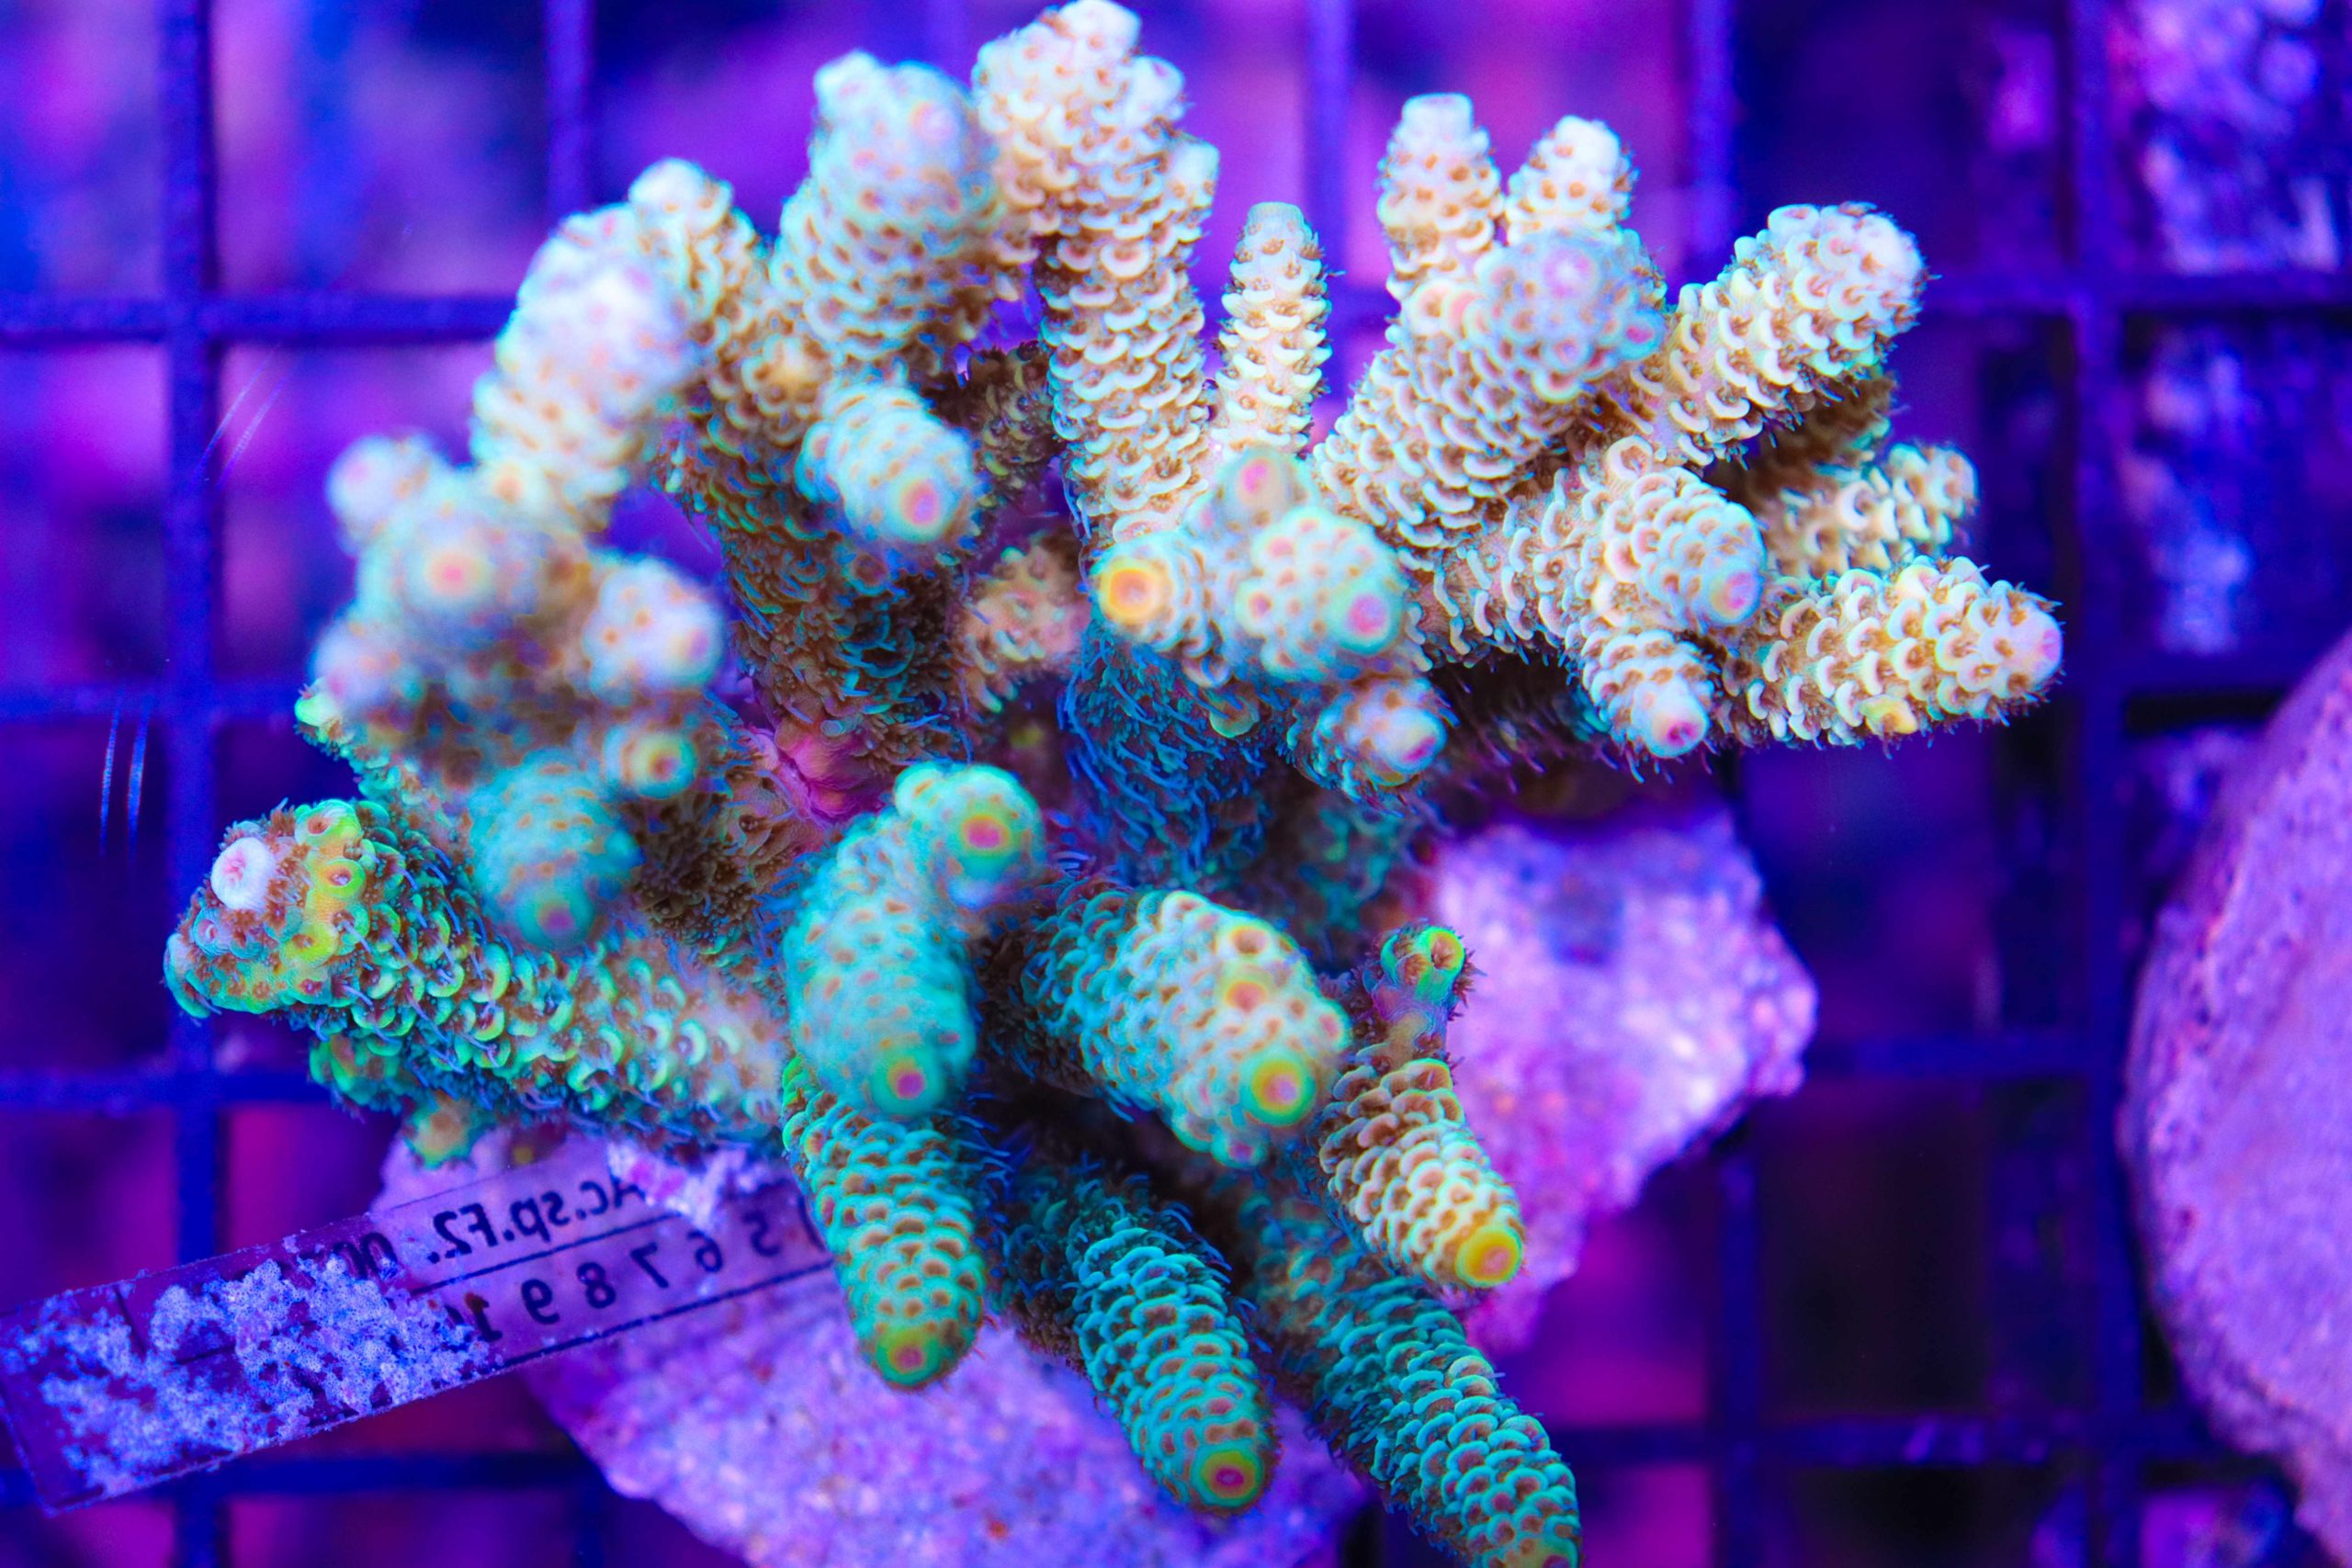 RIVEA - 🪸 Acropora Digitifera, recognizable by the blue color visible on  the tips of its branches. Help us to plant 🪸 with The Coral Planters and  participate in the restoration of